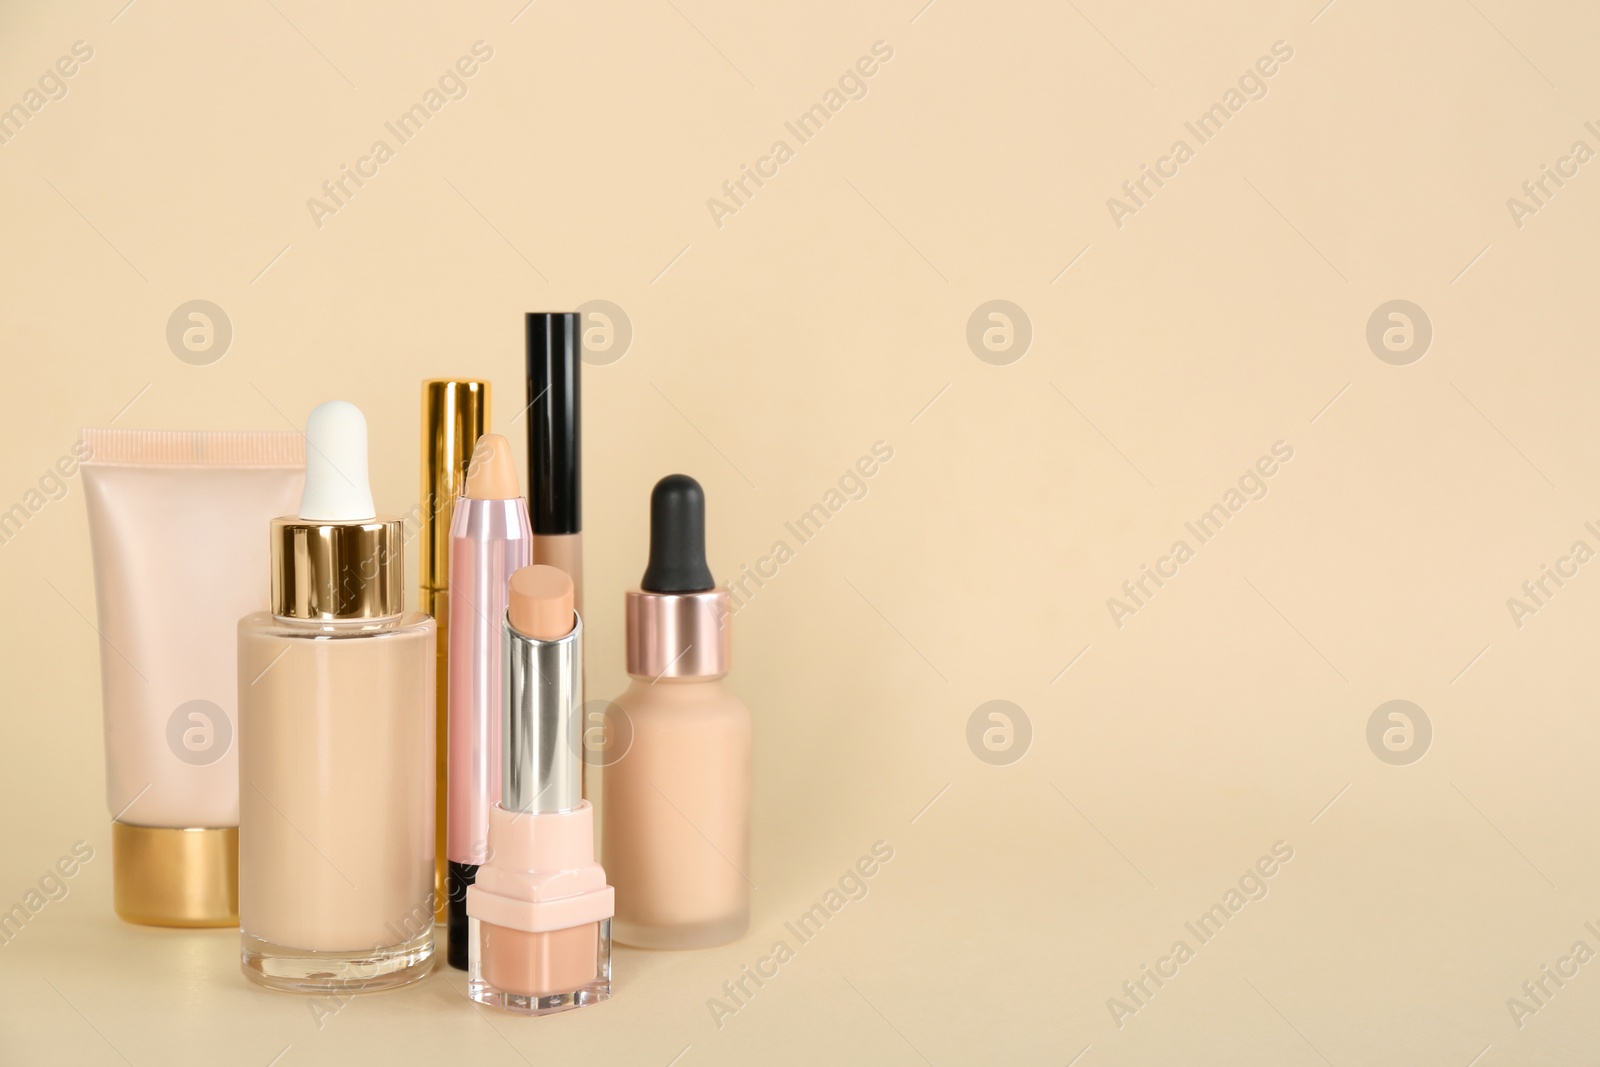 Photo of Foundation makeup products on beige background, space for text. Decorative cosmetics